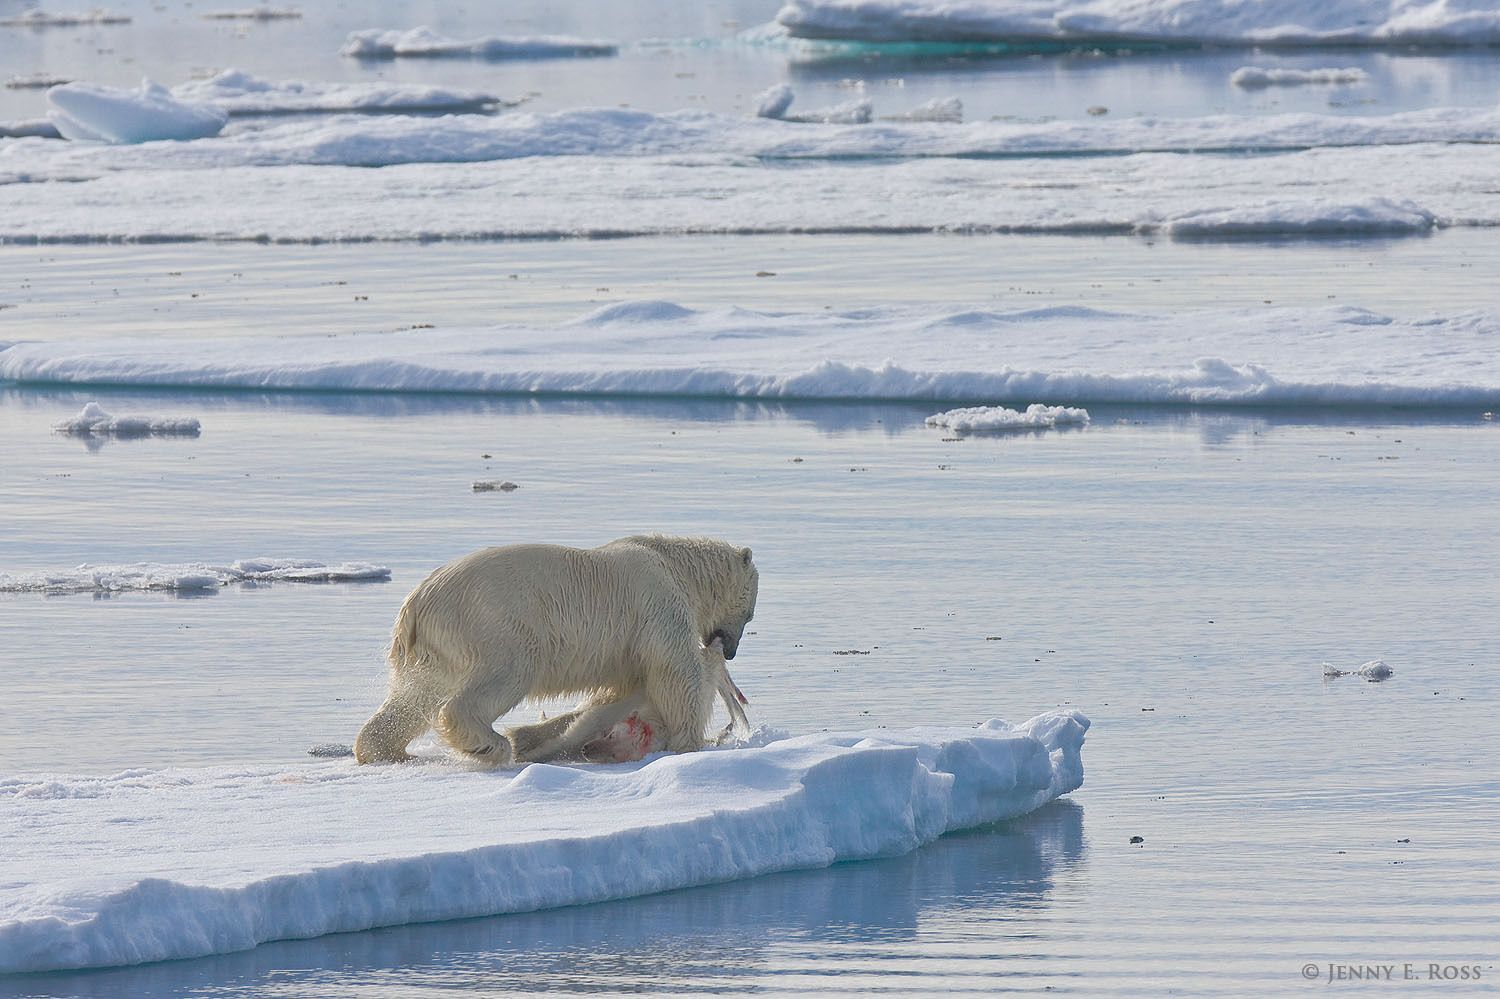 Polar bear infanticide and cannibalism on sea ice, Barents Sea, Svalbard Archipelgo, Norway.